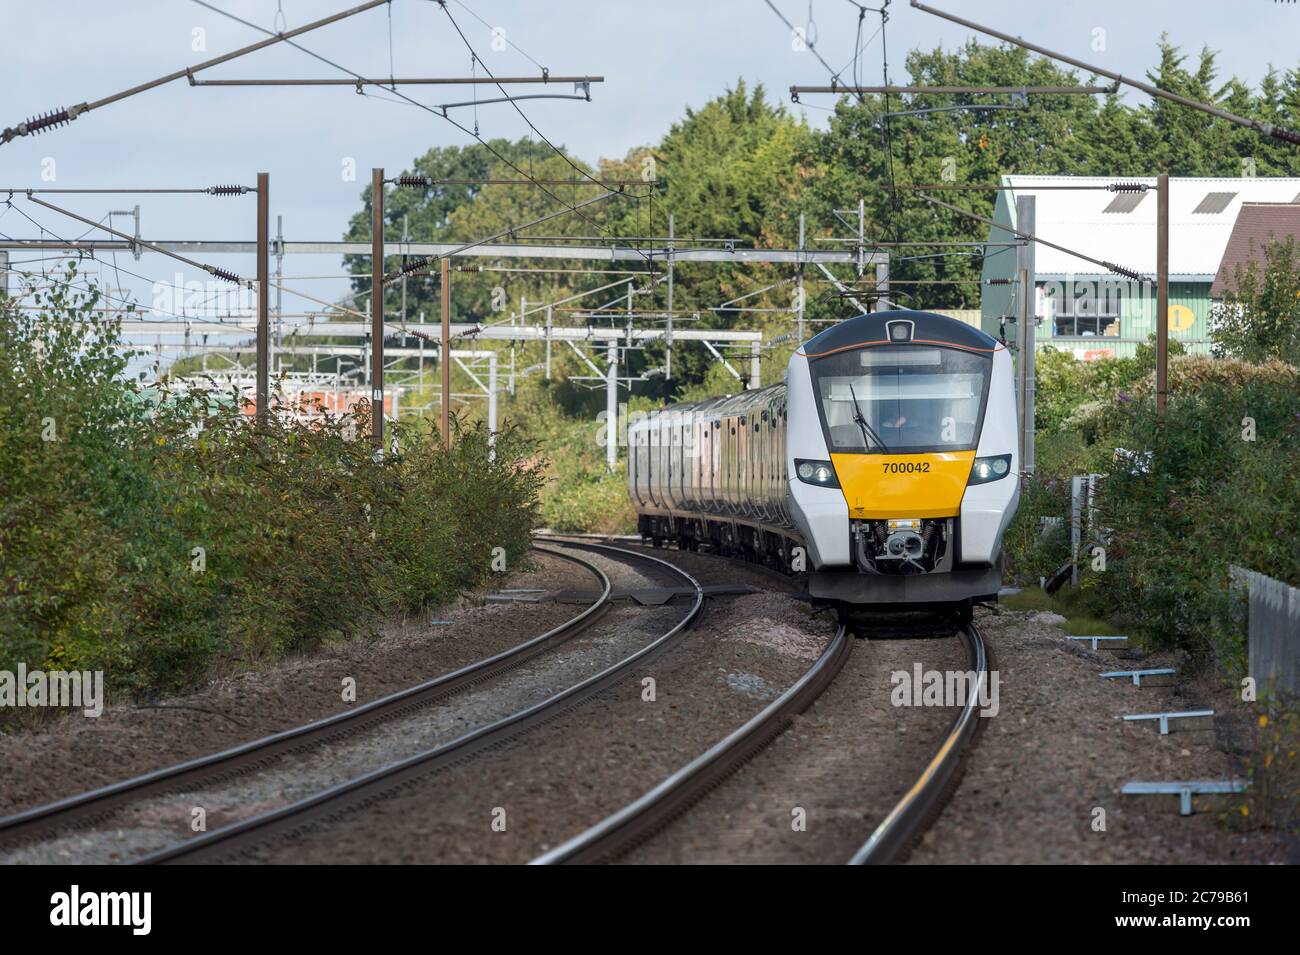 Class 700 passenger train in Thameslink livery travelling in the UK. Stock Photo